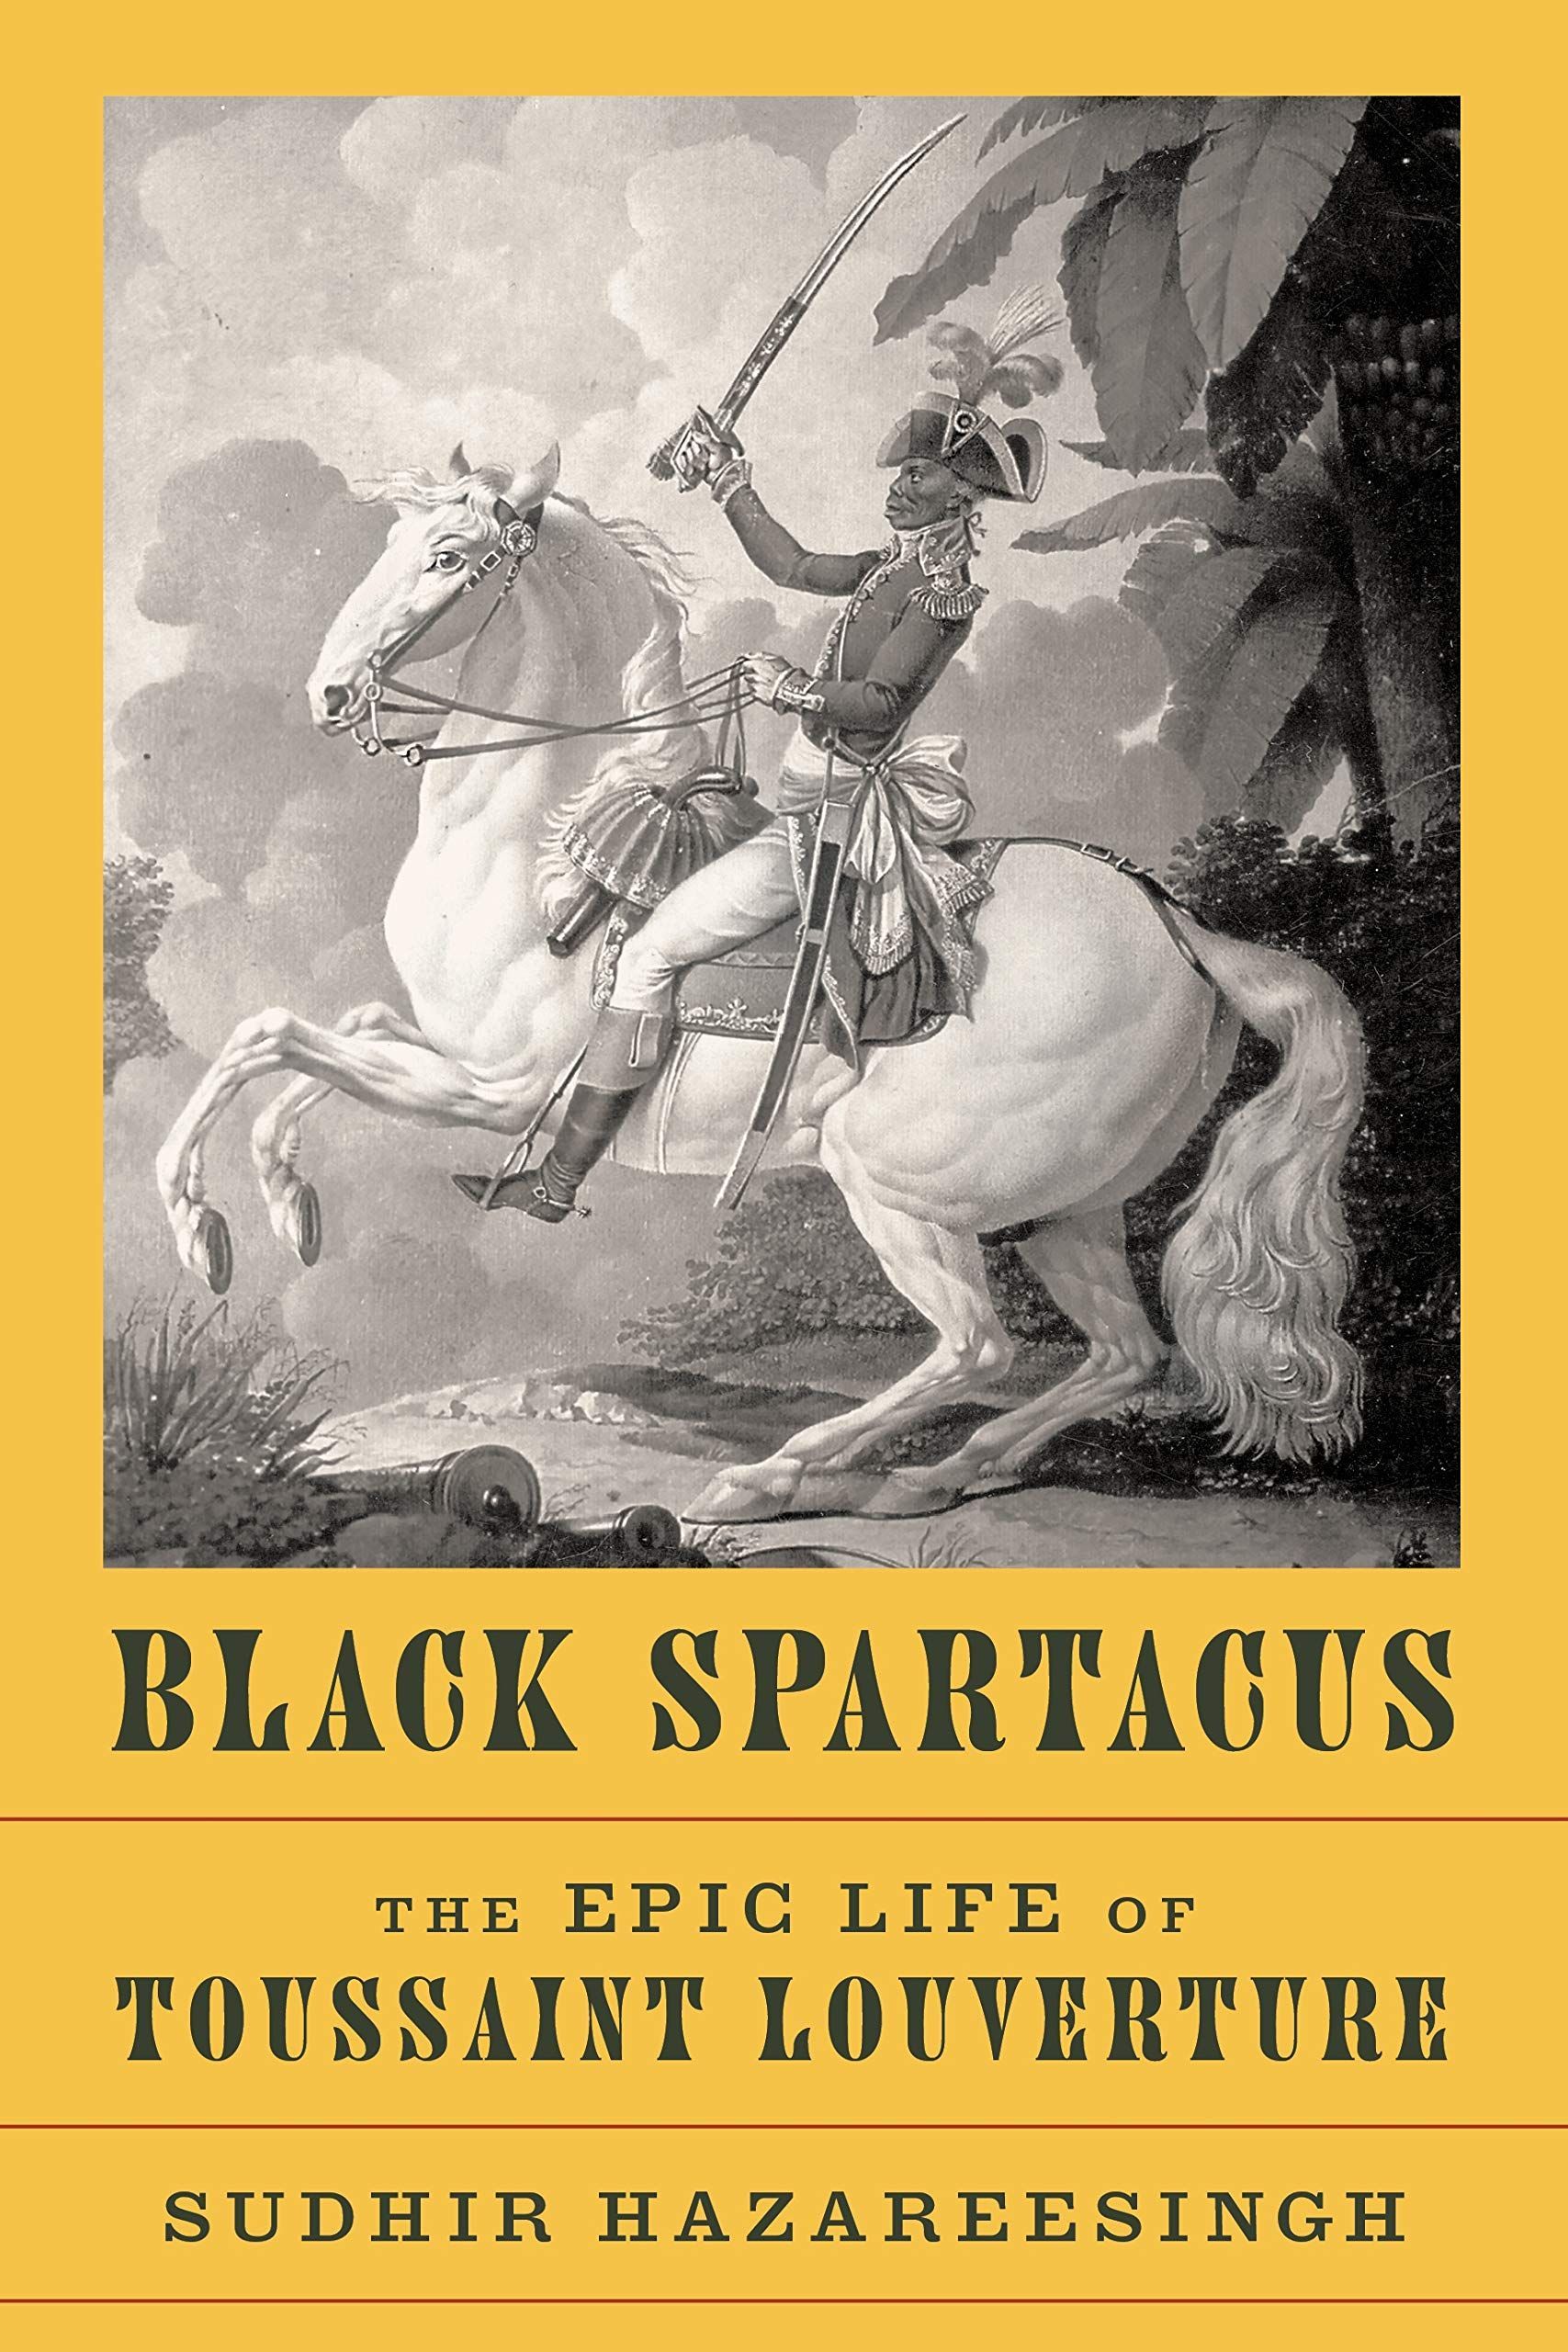 What Should I Do with Such a Man?: On “Black Spartacus: The Epic Life of Toussaint Louverture”